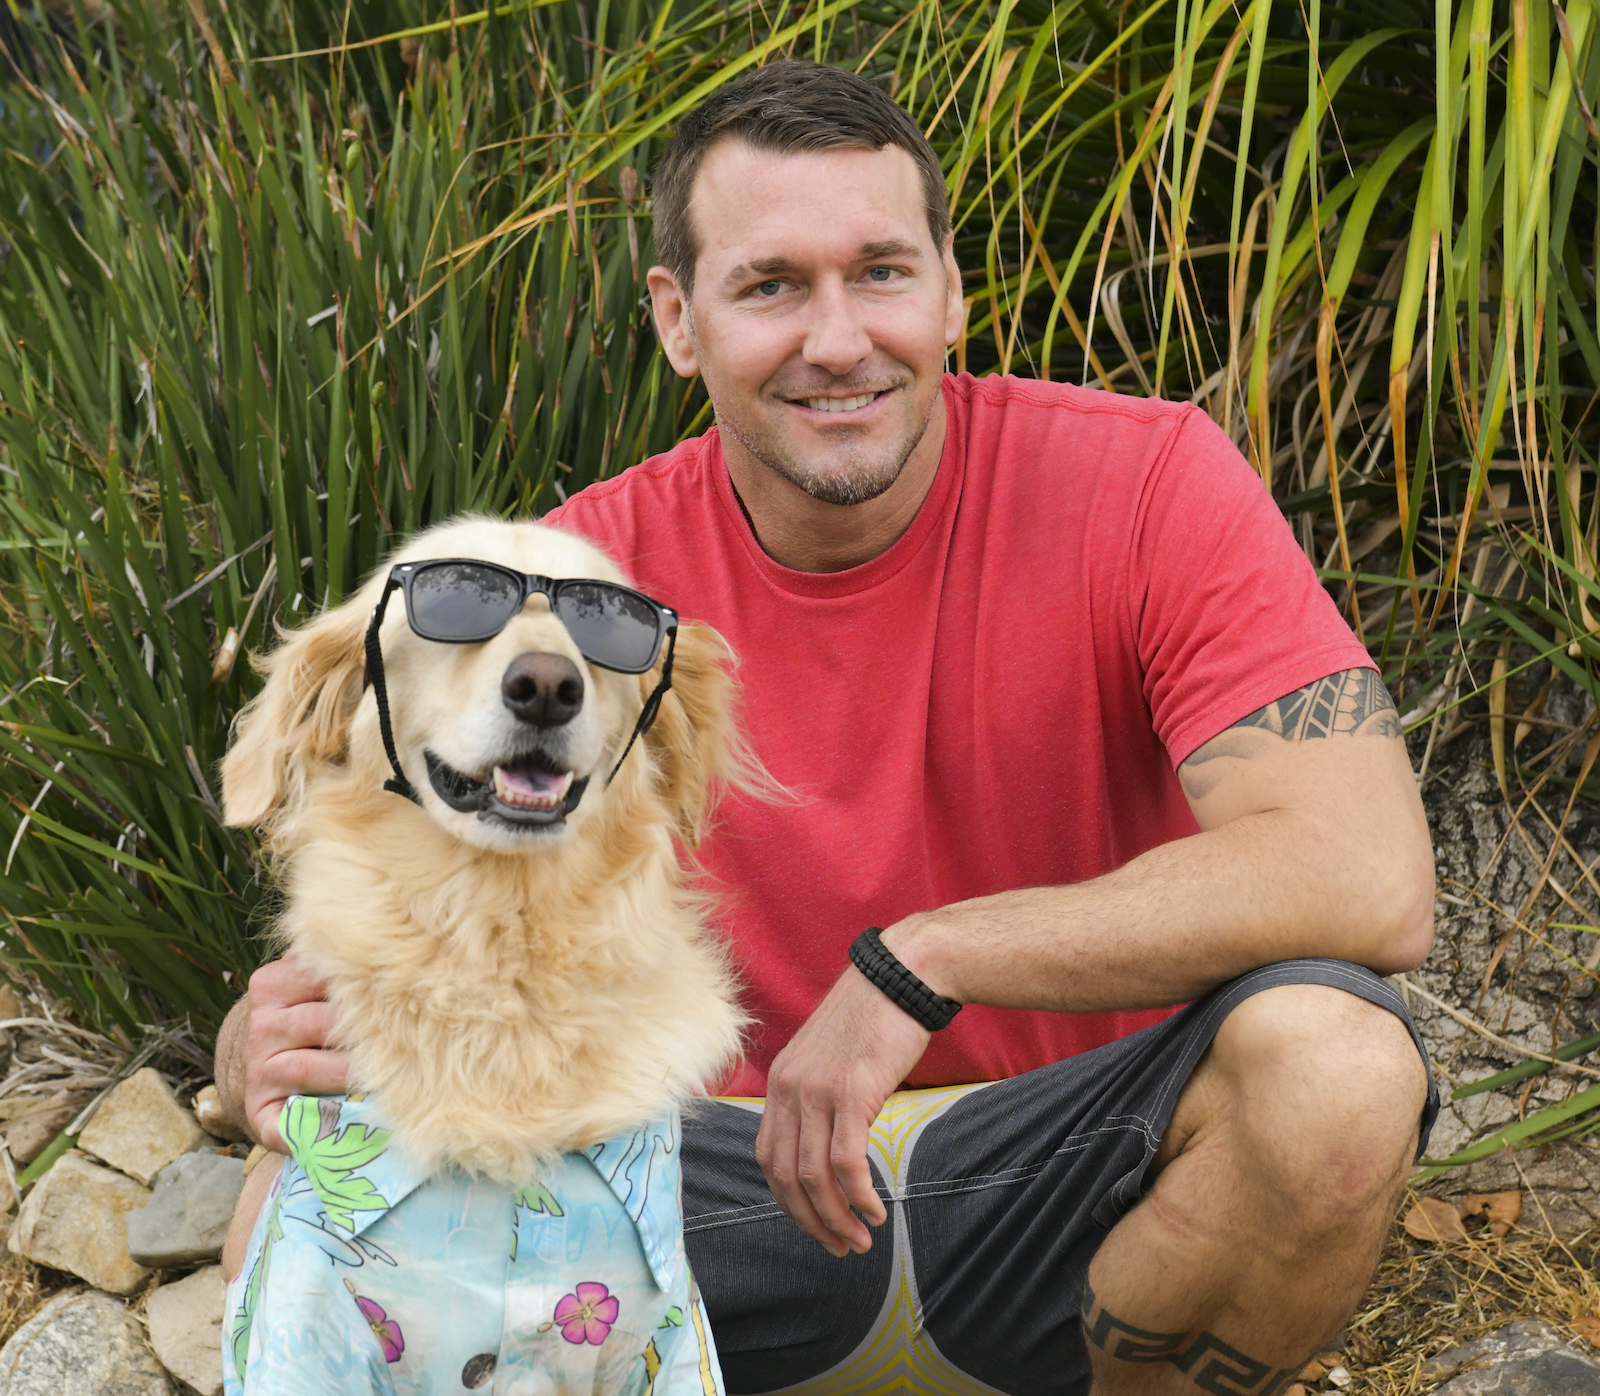 Dog trainer Brandon McMillan smiles with a dog who is wearing sunglasses and a shirt